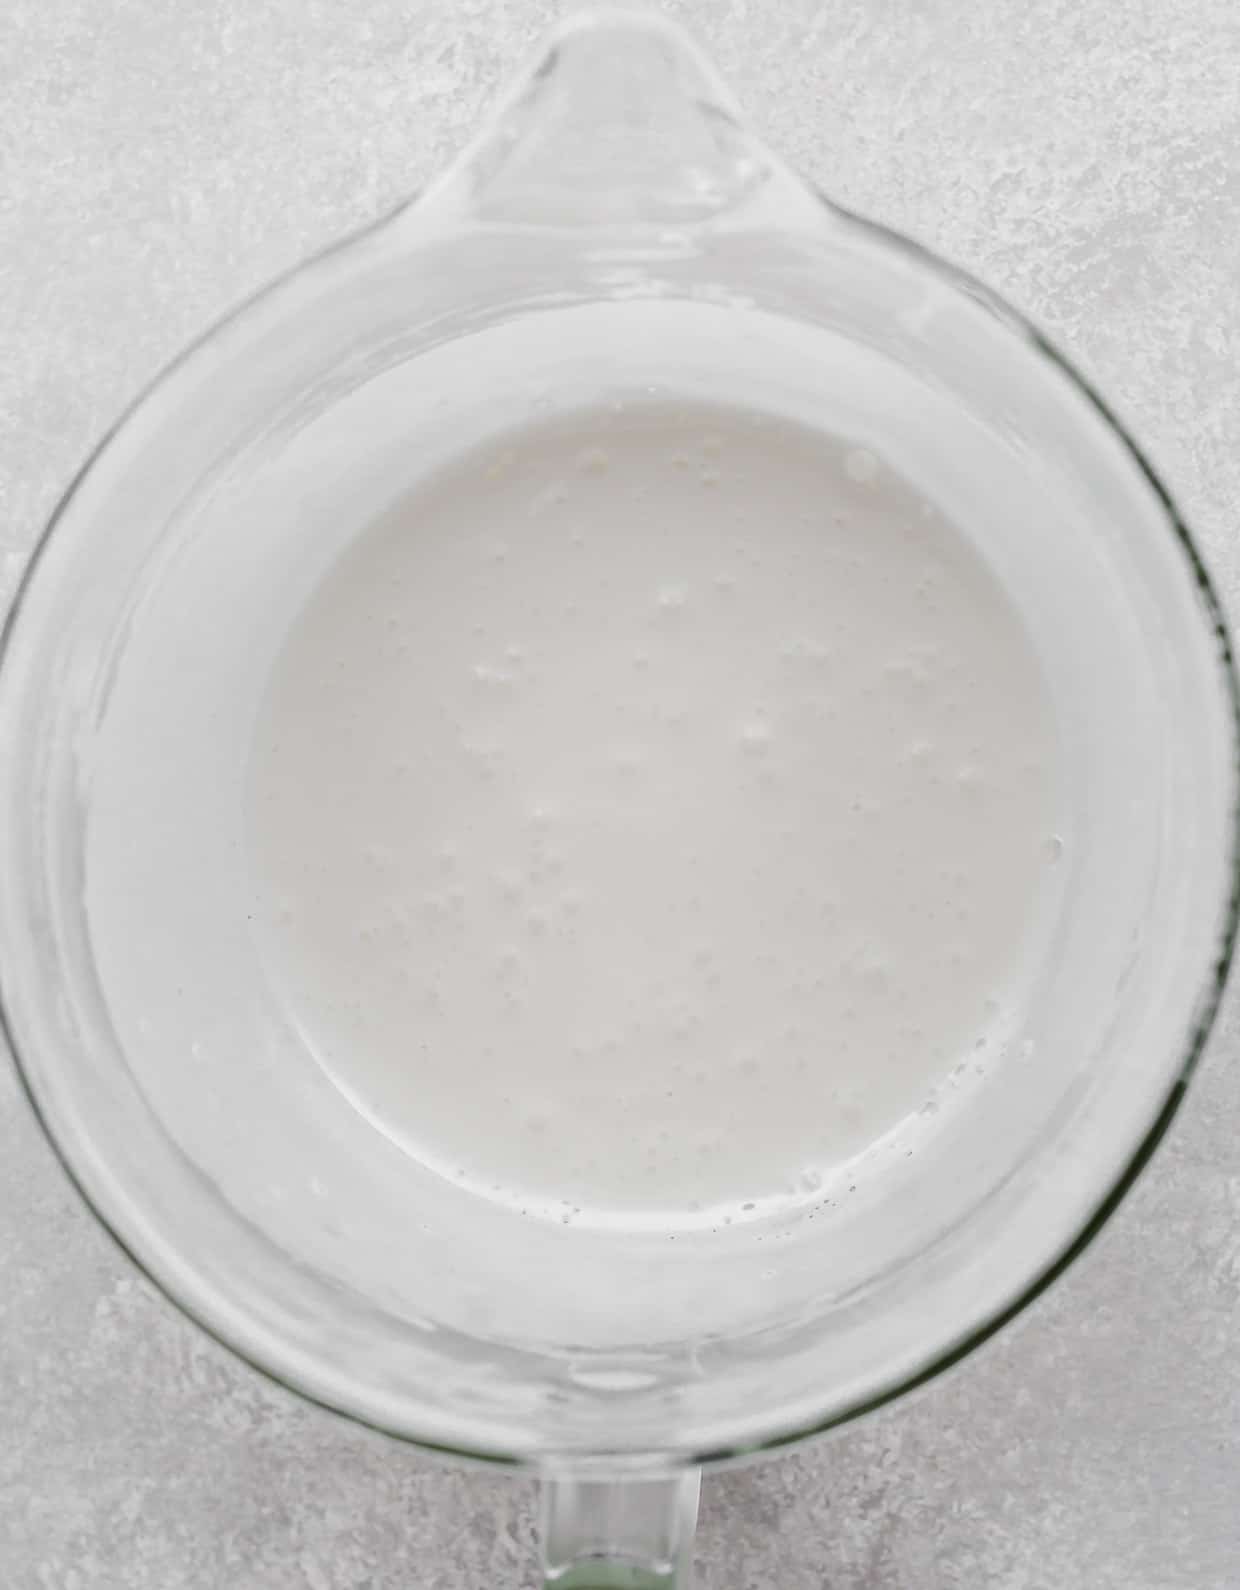 A glass stand mixer bowl with a white liquid mixture in it on a light gray background.